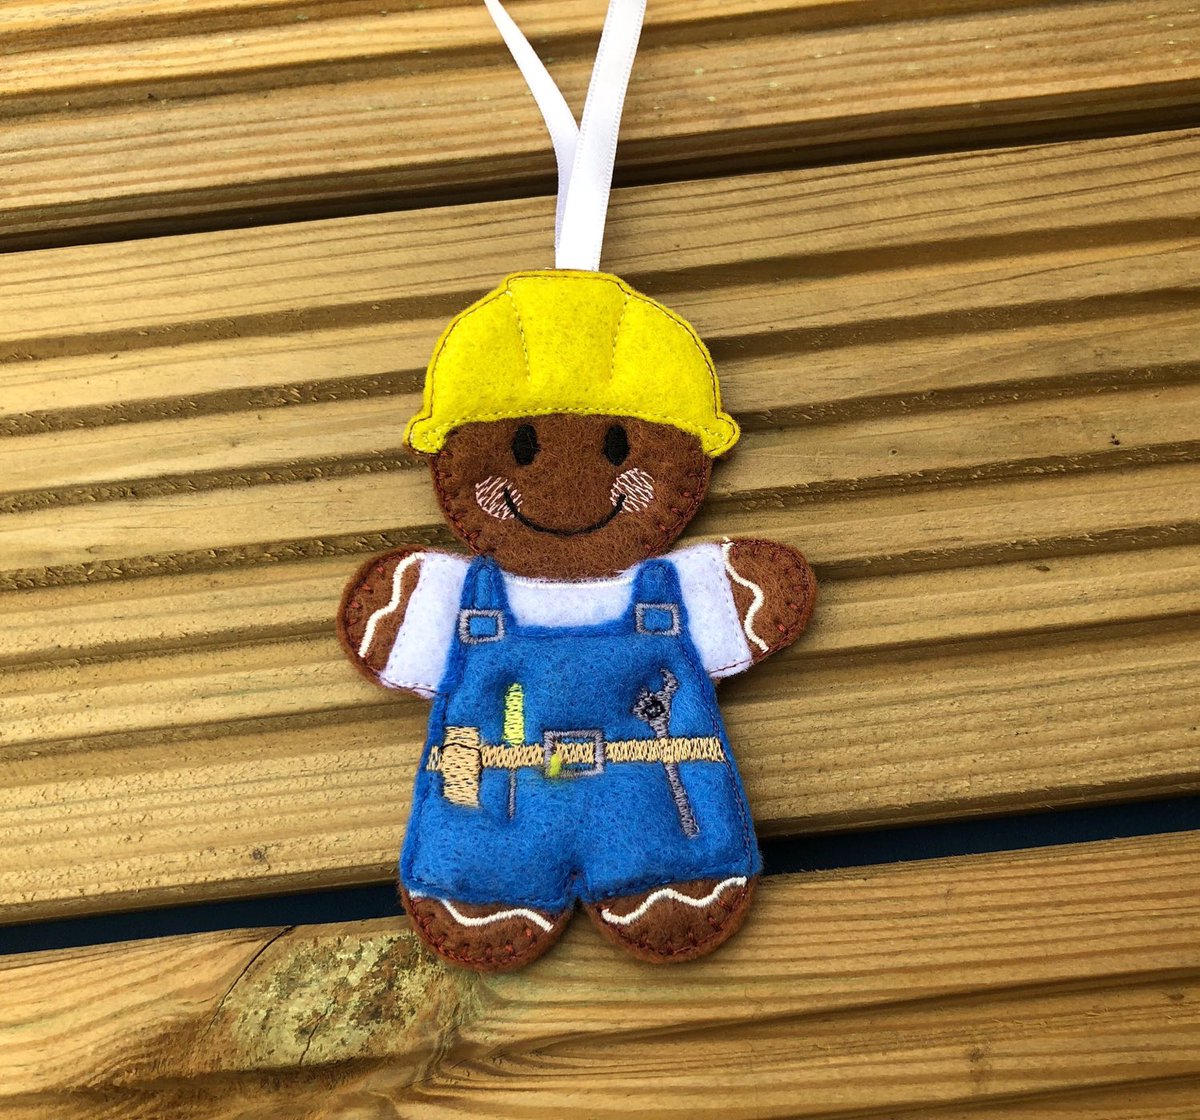 Excited to share this item from my #etsy shop: Builder Gift, Builder Gingerbread man, Hanging Gingerbread Man, Gingerbread Man, Personalised Gingerbread Man #builderginger #buildergift #fathersdaygift #personalisedgift #christmasgift etsy.me/389QrMa